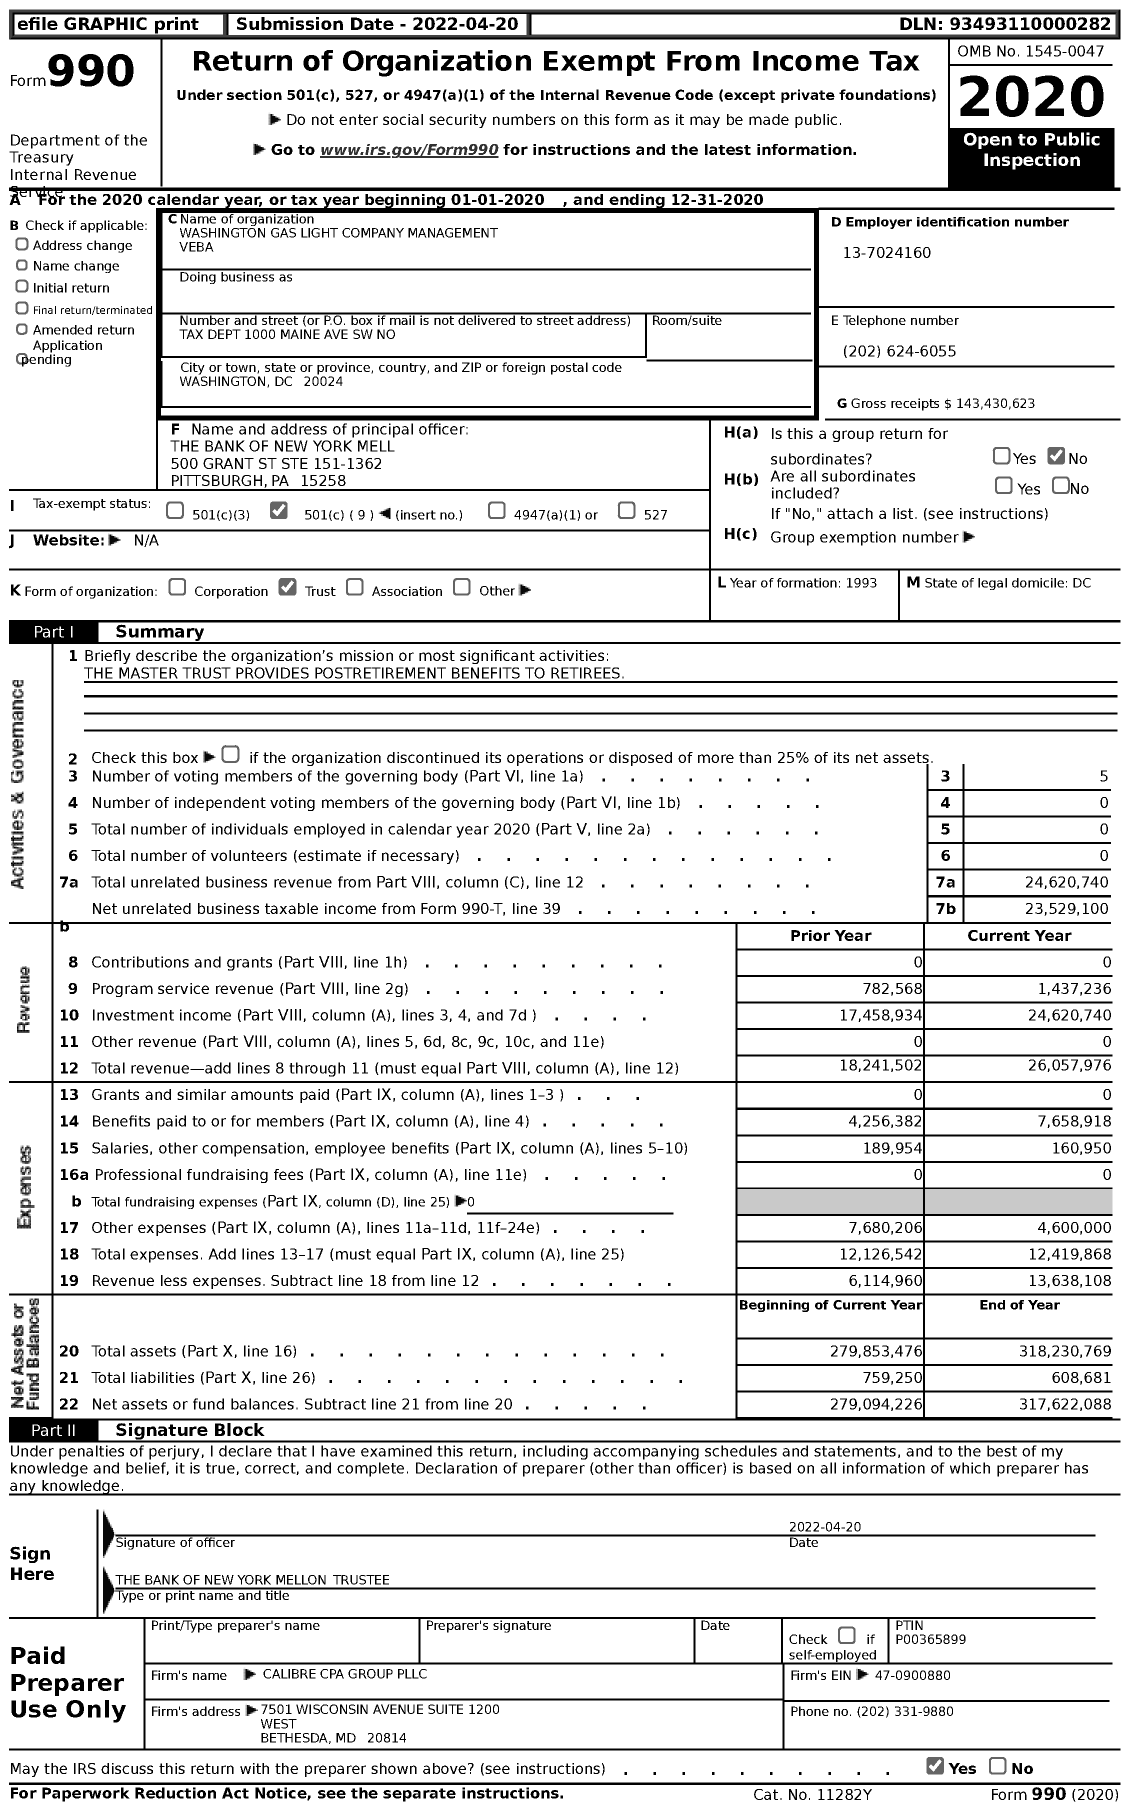 Image of first page of 2020 Form 990 for Washington Gas Light Company Management Veba